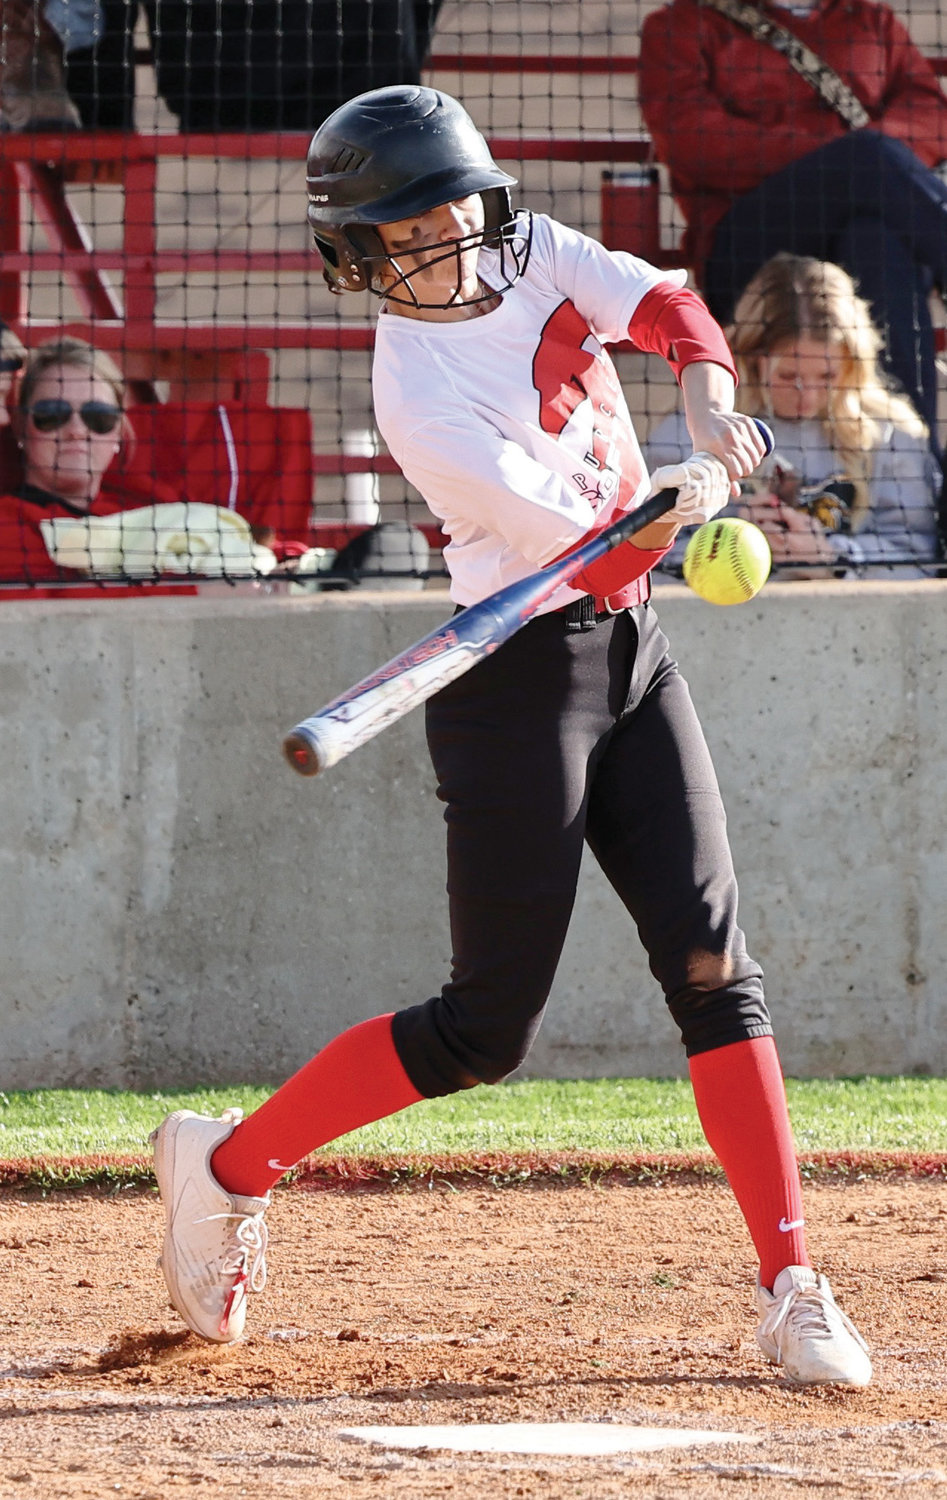 Purcell junior Payci Constant drives a ball off the barrel of the bat for the Dragons. Constant and the Dragons host a pair of games today (Thursday) – Dibble at 11 a.m. and Mustang at 3 p.m.